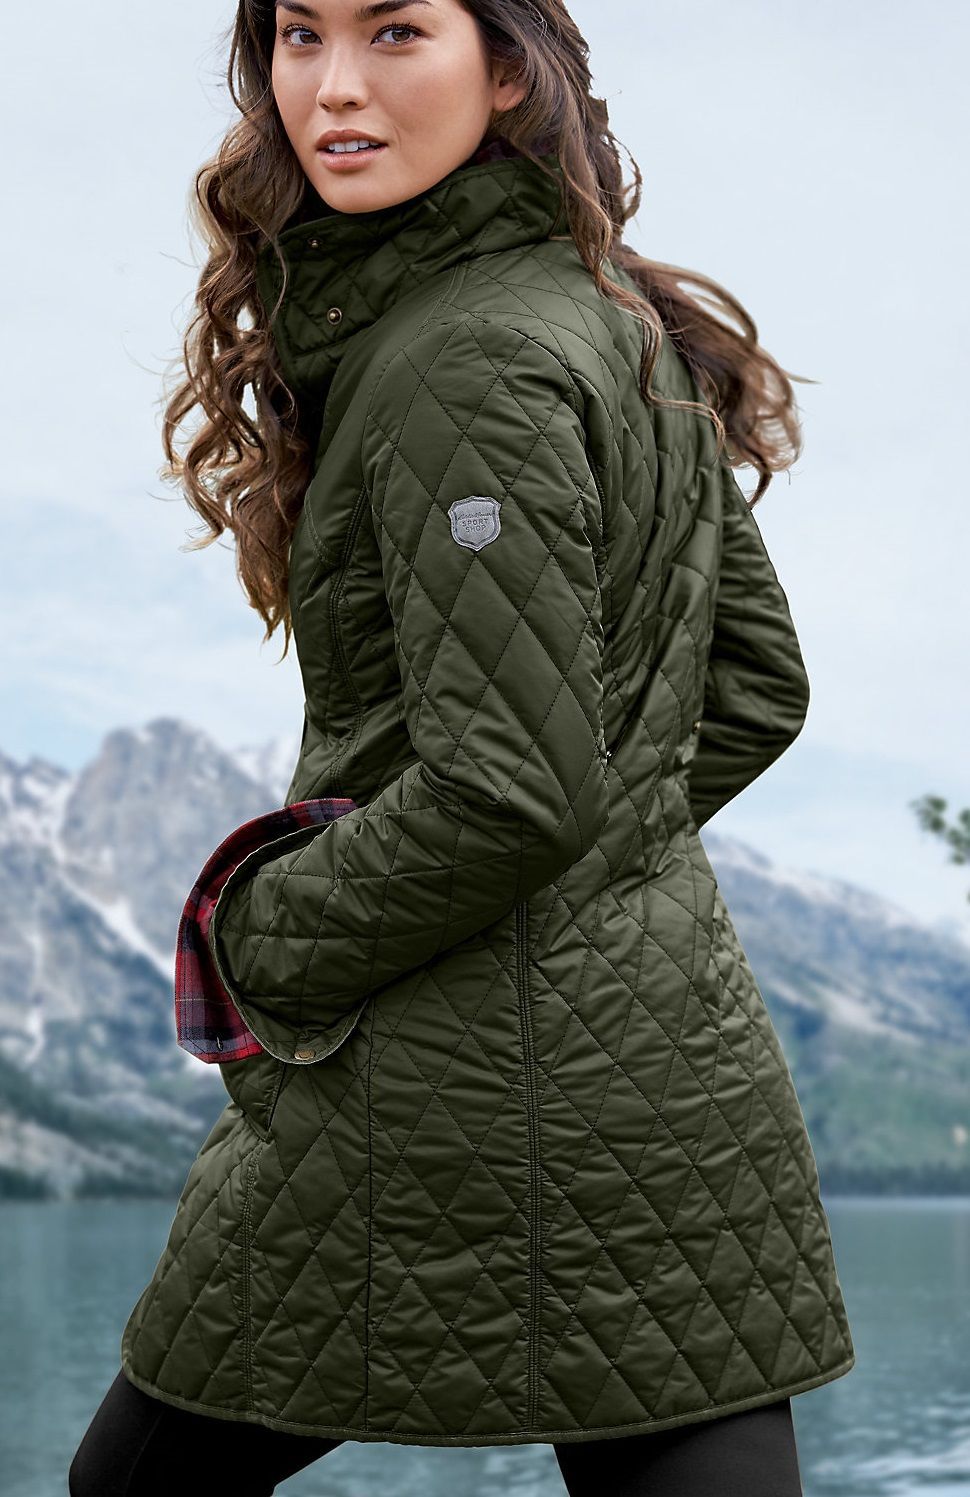 Womens Year-Round Field Coat | Light enough for spring and summer, yet warm enough to take you comfortably into the field in